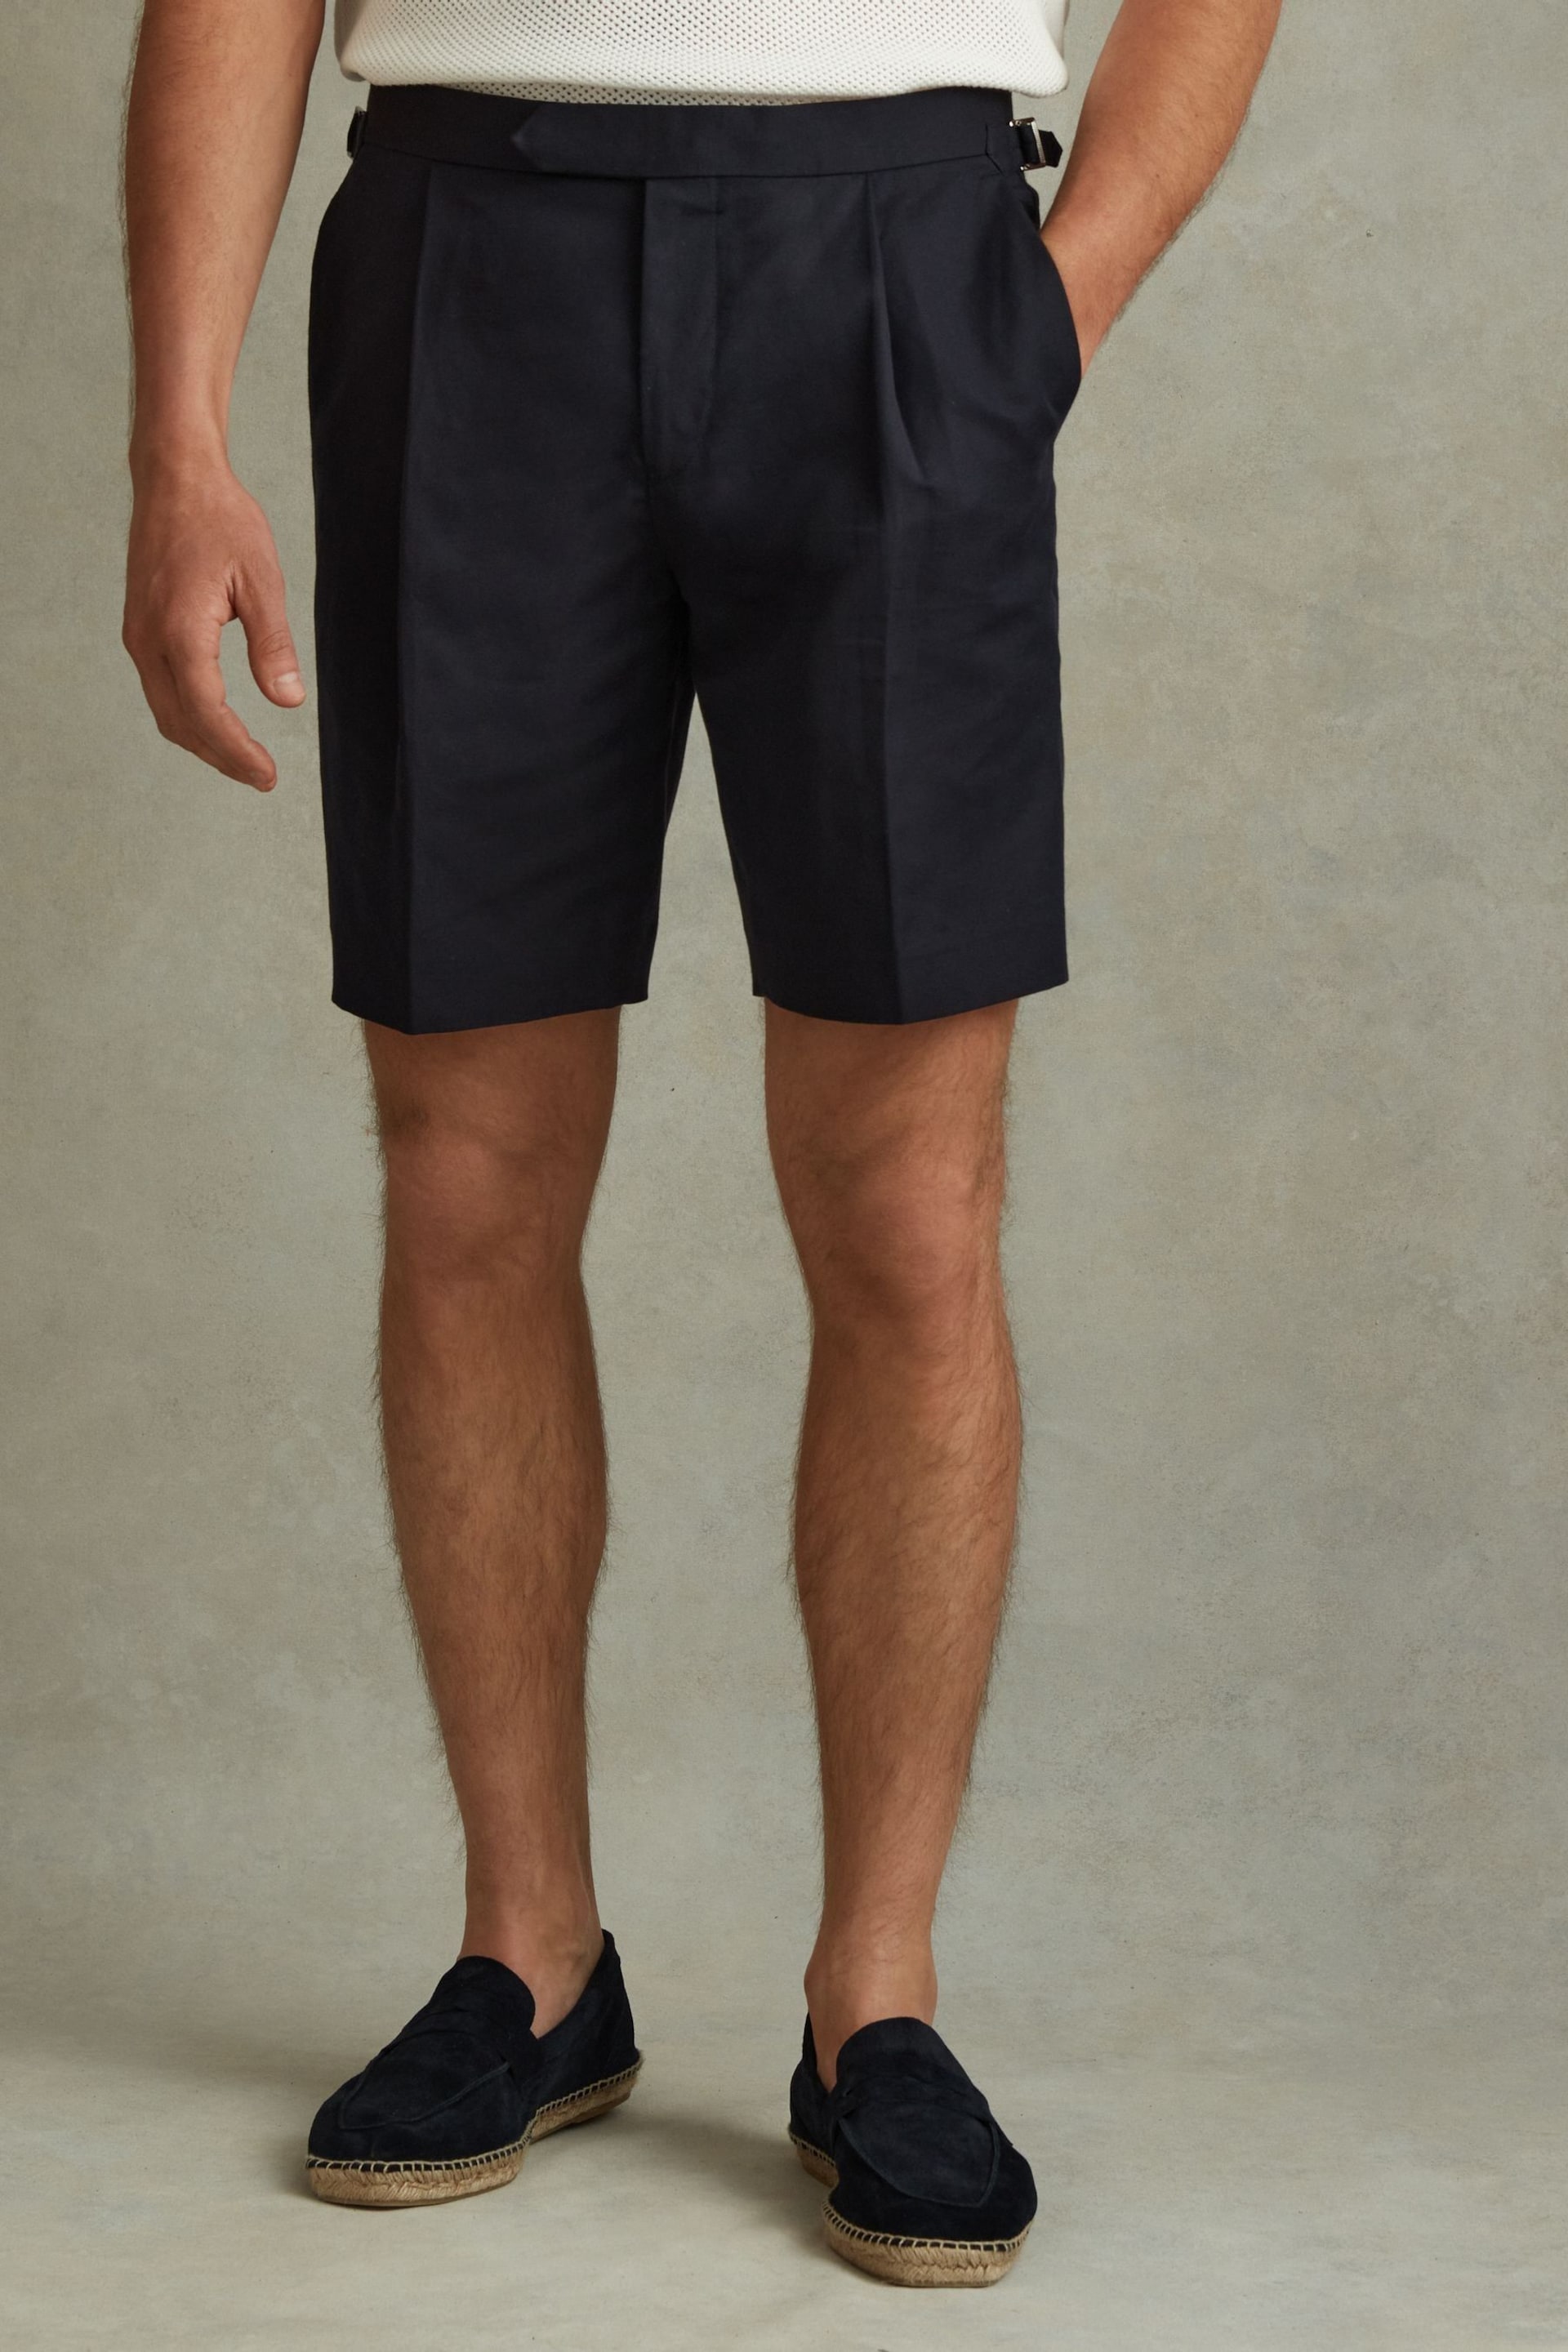 Reiss Navy Con Cotton Blend Adjuster Shorts - Image 3 of 5